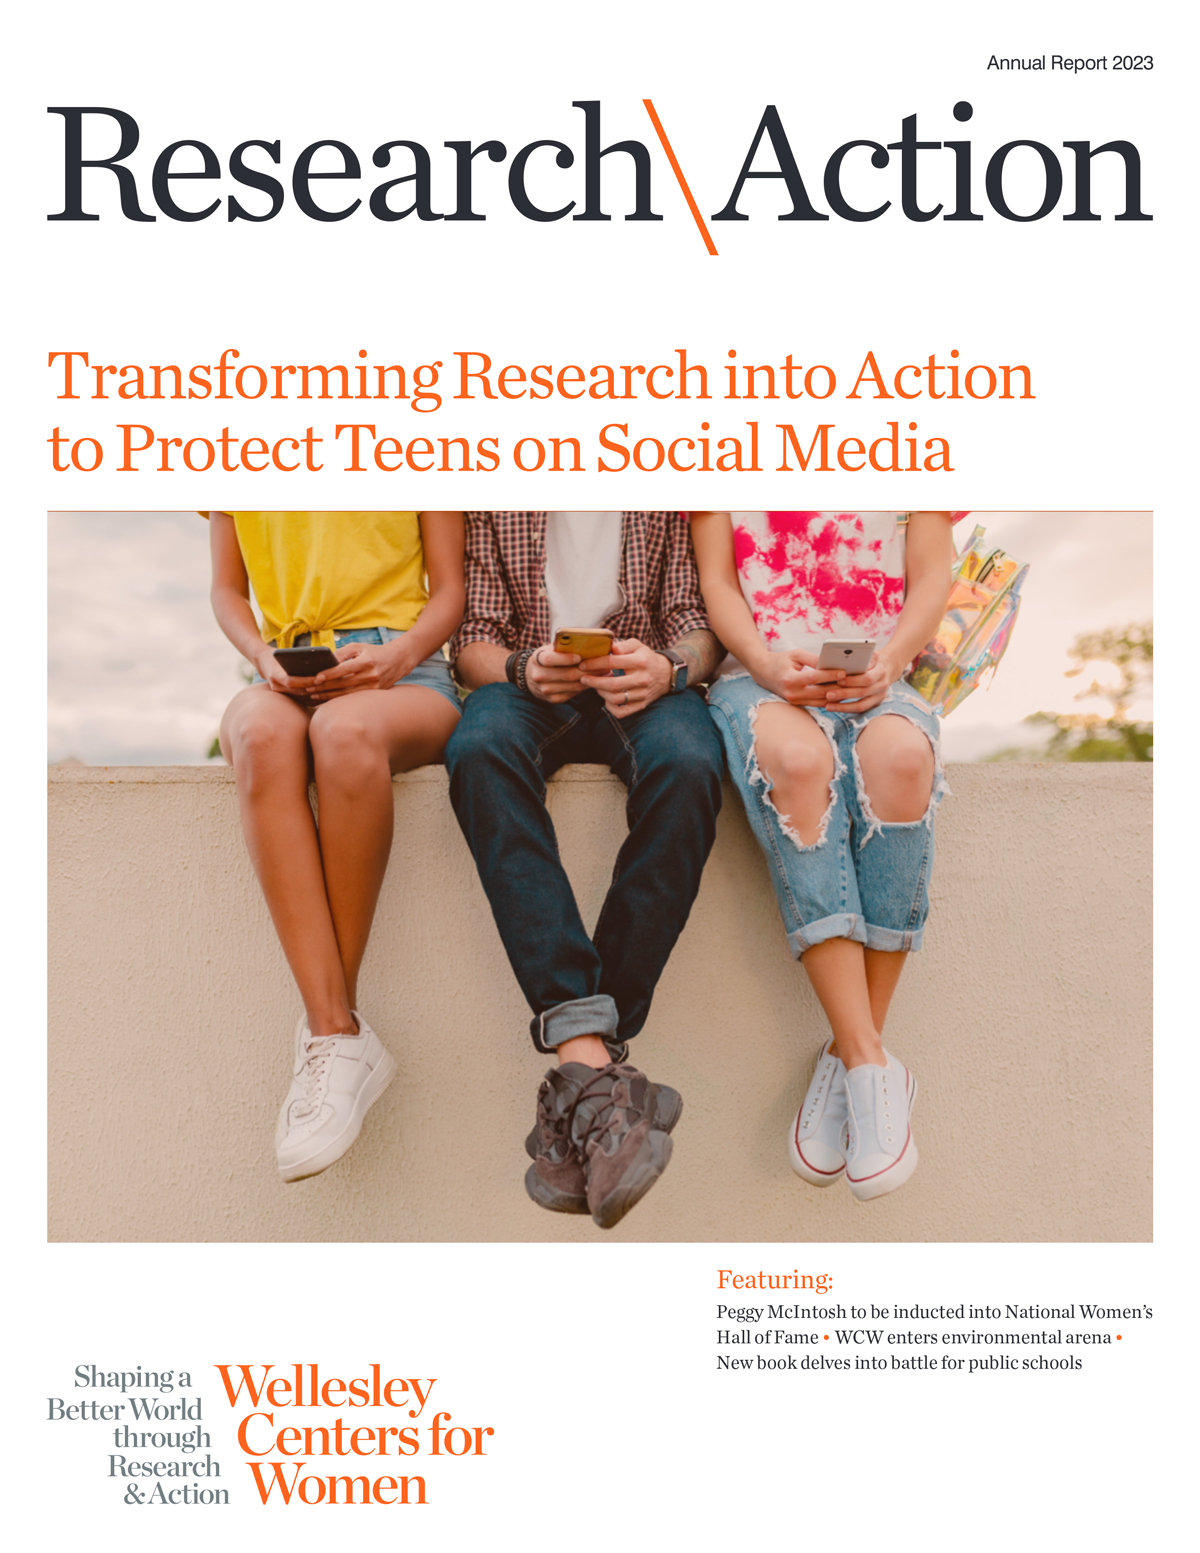 Research & Action Annual Report 2023